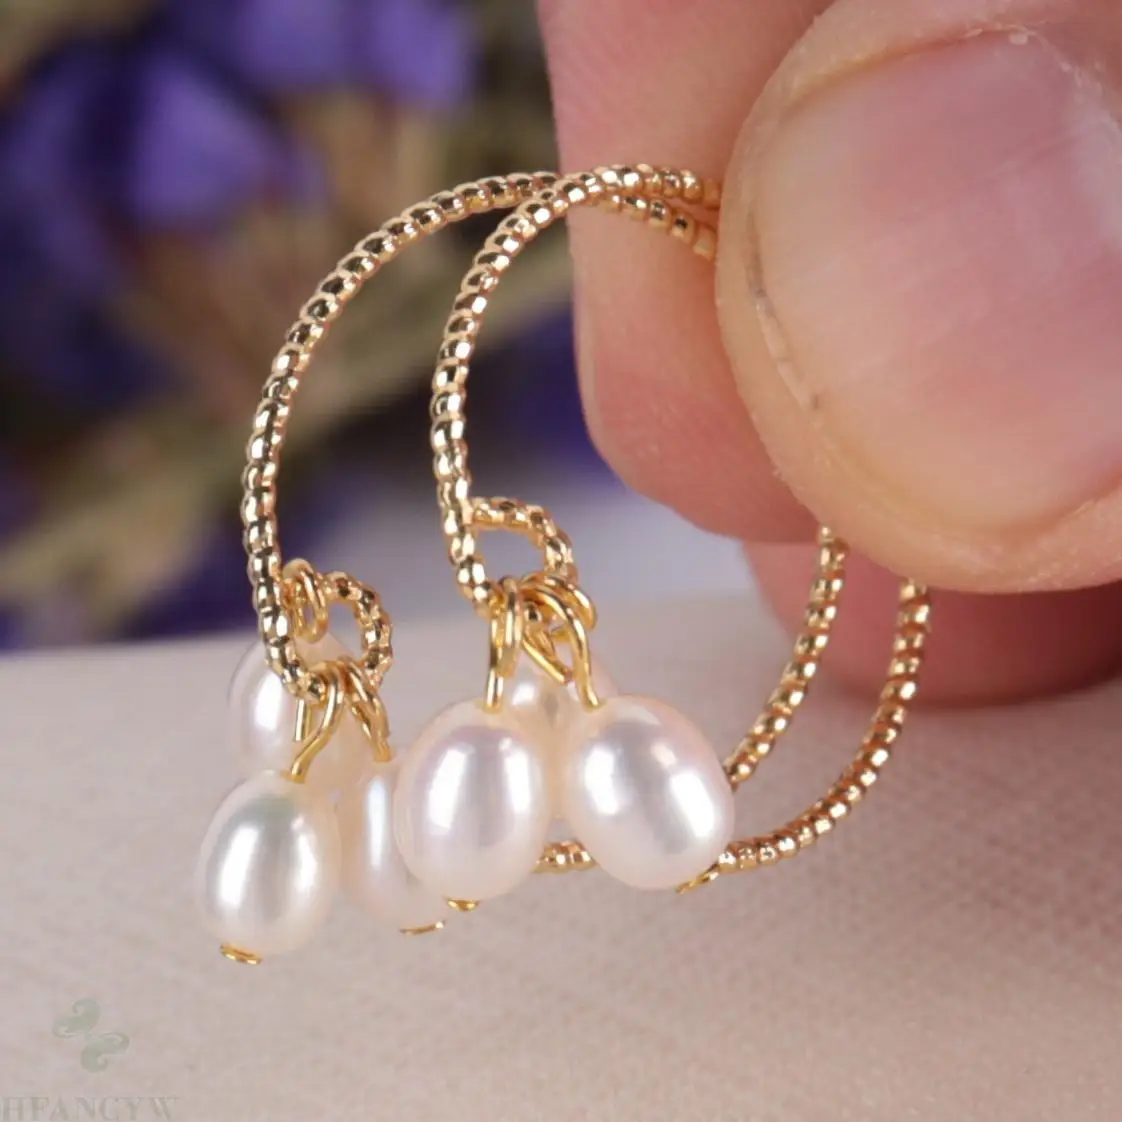 3x4MM Natural white baroque pearl Earring 18k Ear Drop Wedding Gift Hook Party Fashion Jewelry Cultured Women